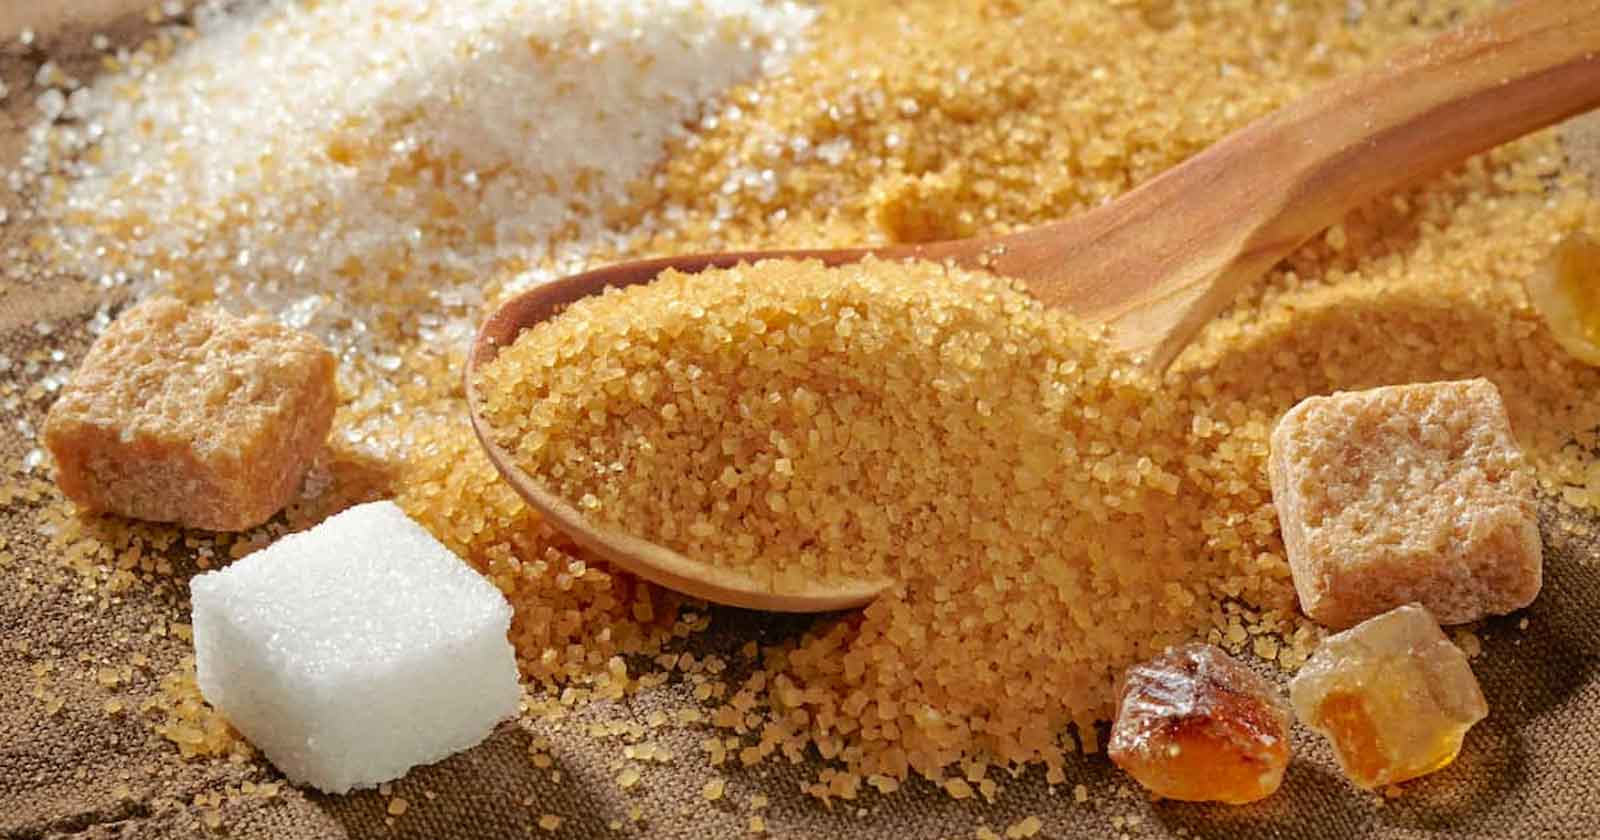 CETA - Excise Duty - CESTAT allows Cenvat Credit on Sugar Cess Paid - Import of Raw Sugar -Cenvat Credit - taxscan